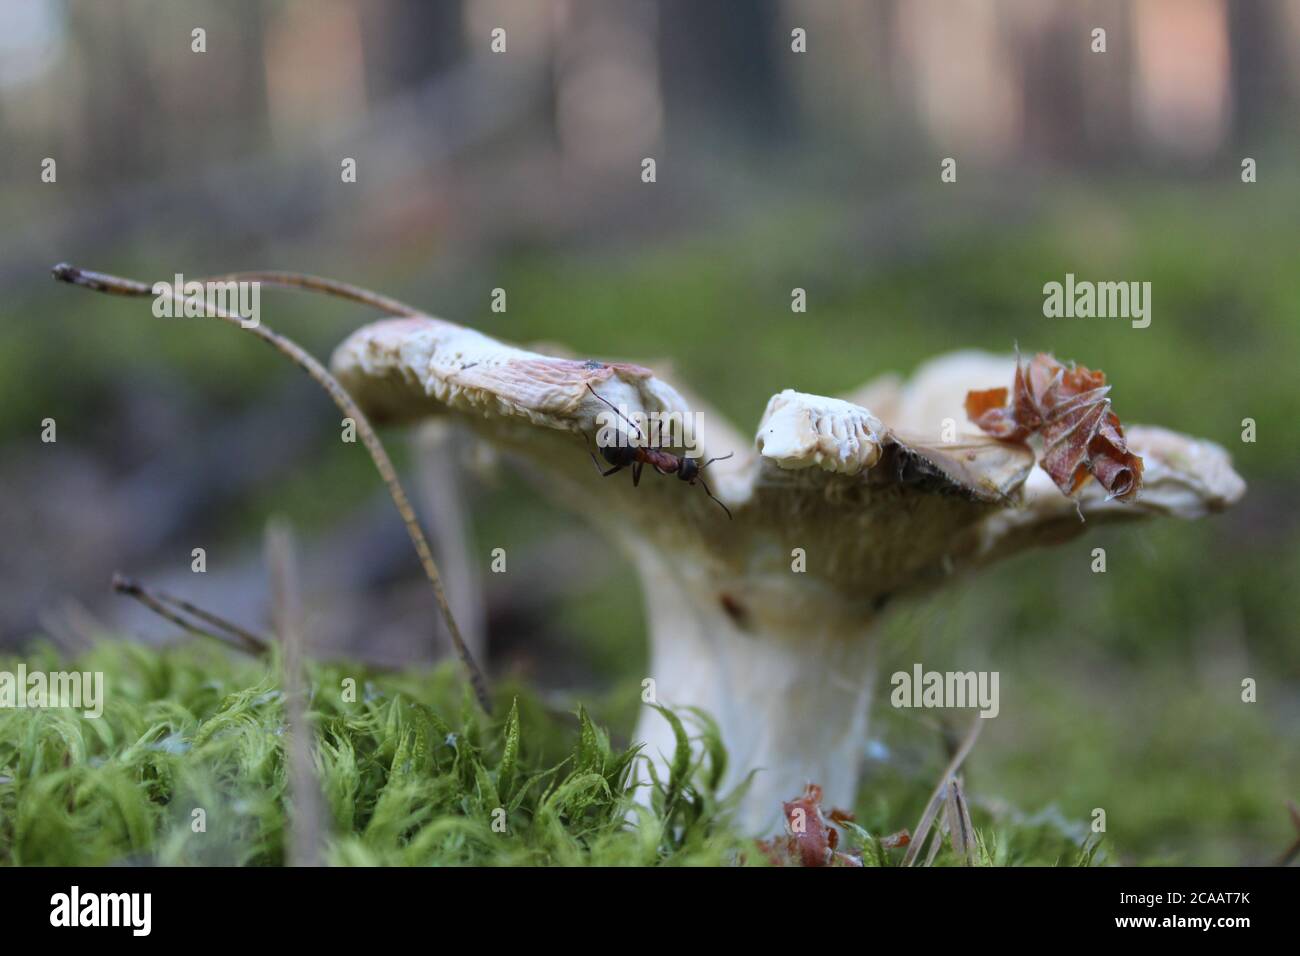 the brown cap of the mushroom is visible from the grass behind a stick a club mushrooms grow in the woods collecting mushrooms rest a mushroom of whit Stock Photo